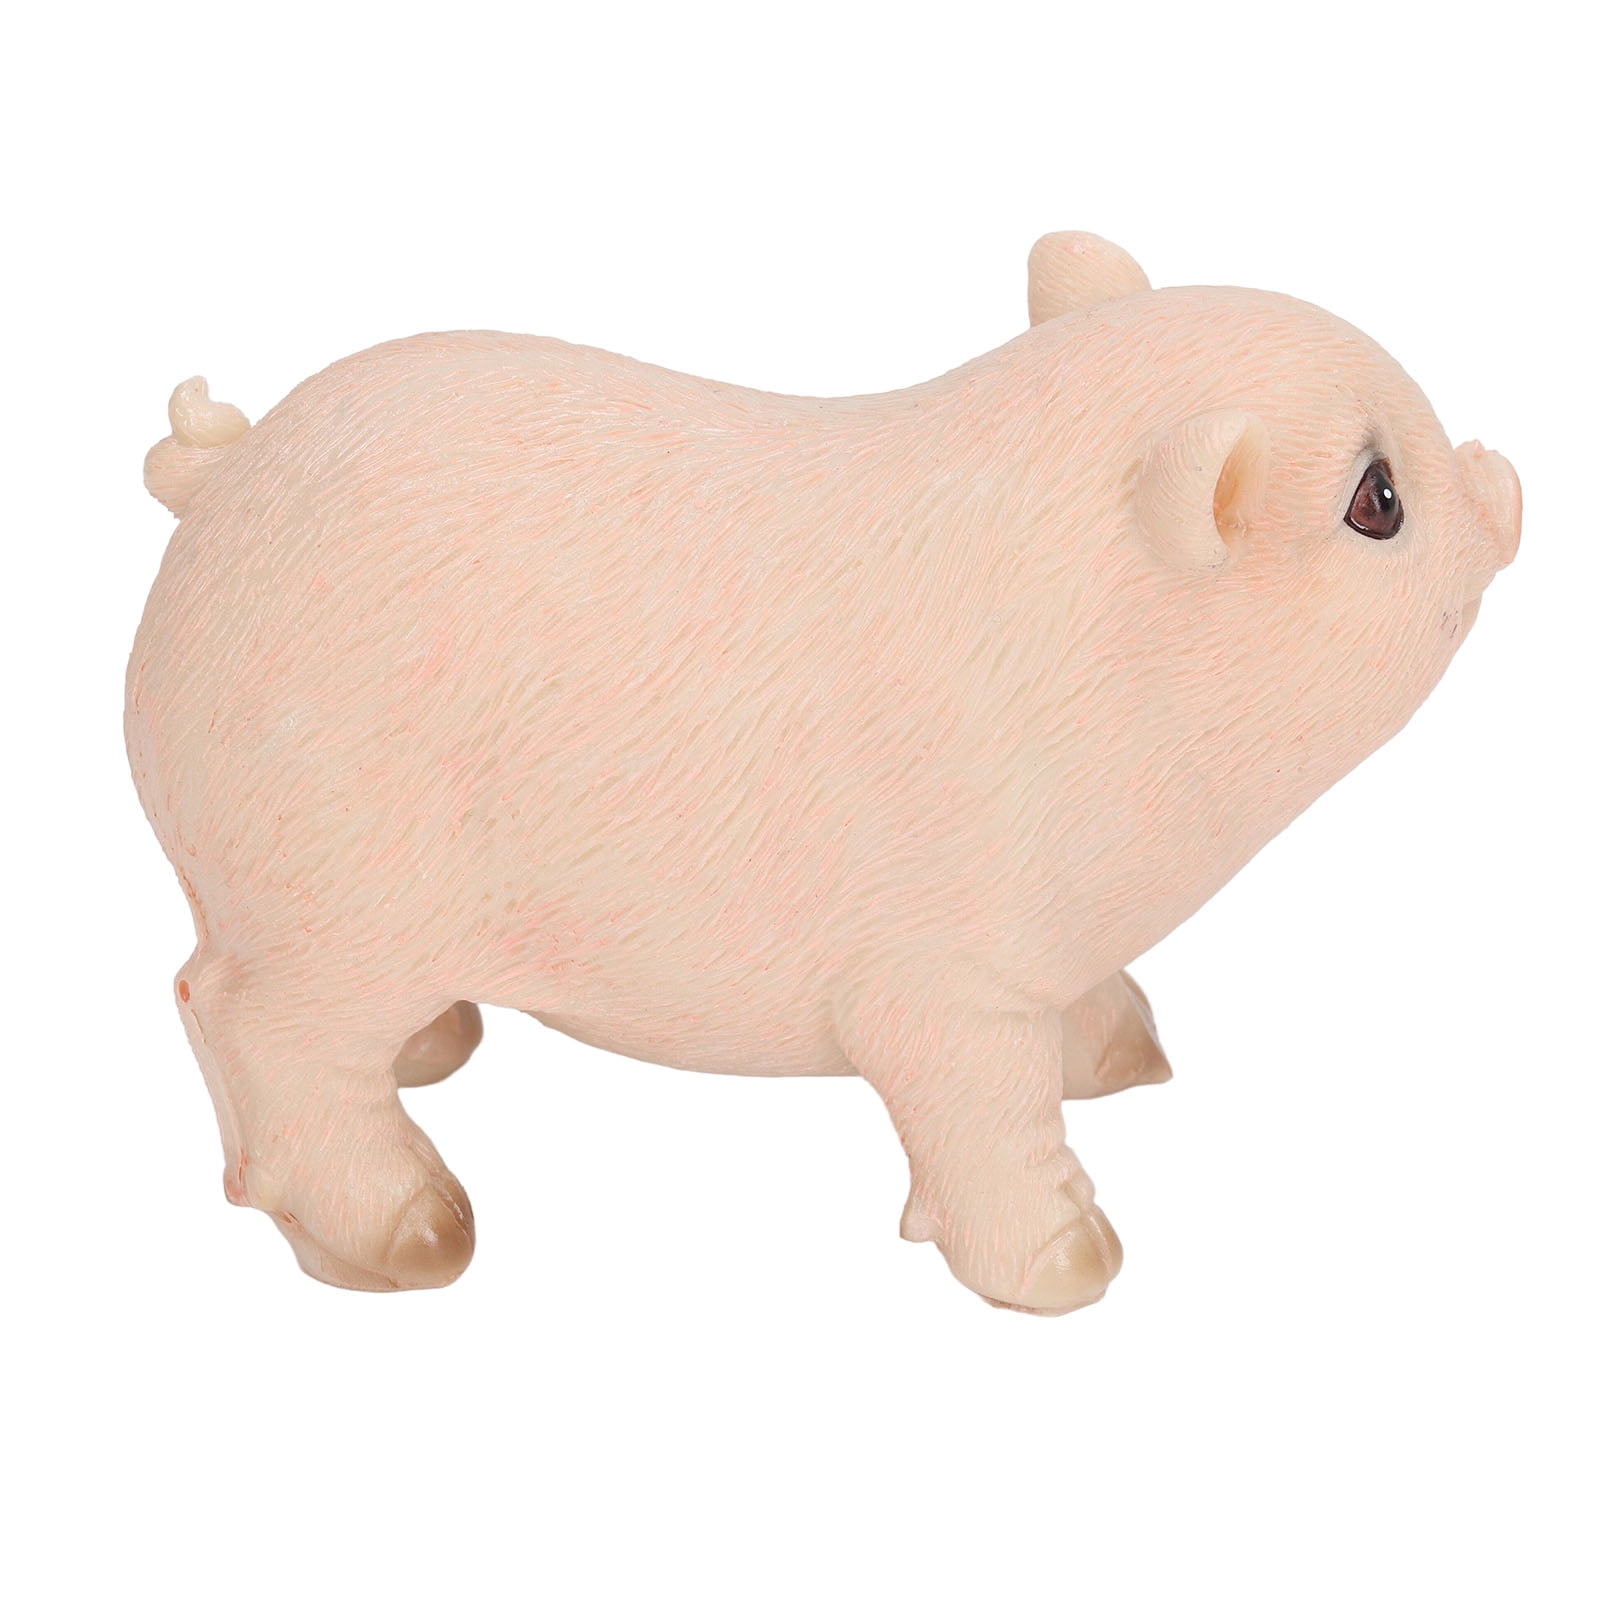 Pig Garden Statue, Cute Small Resin Animals Art Figurine For Home